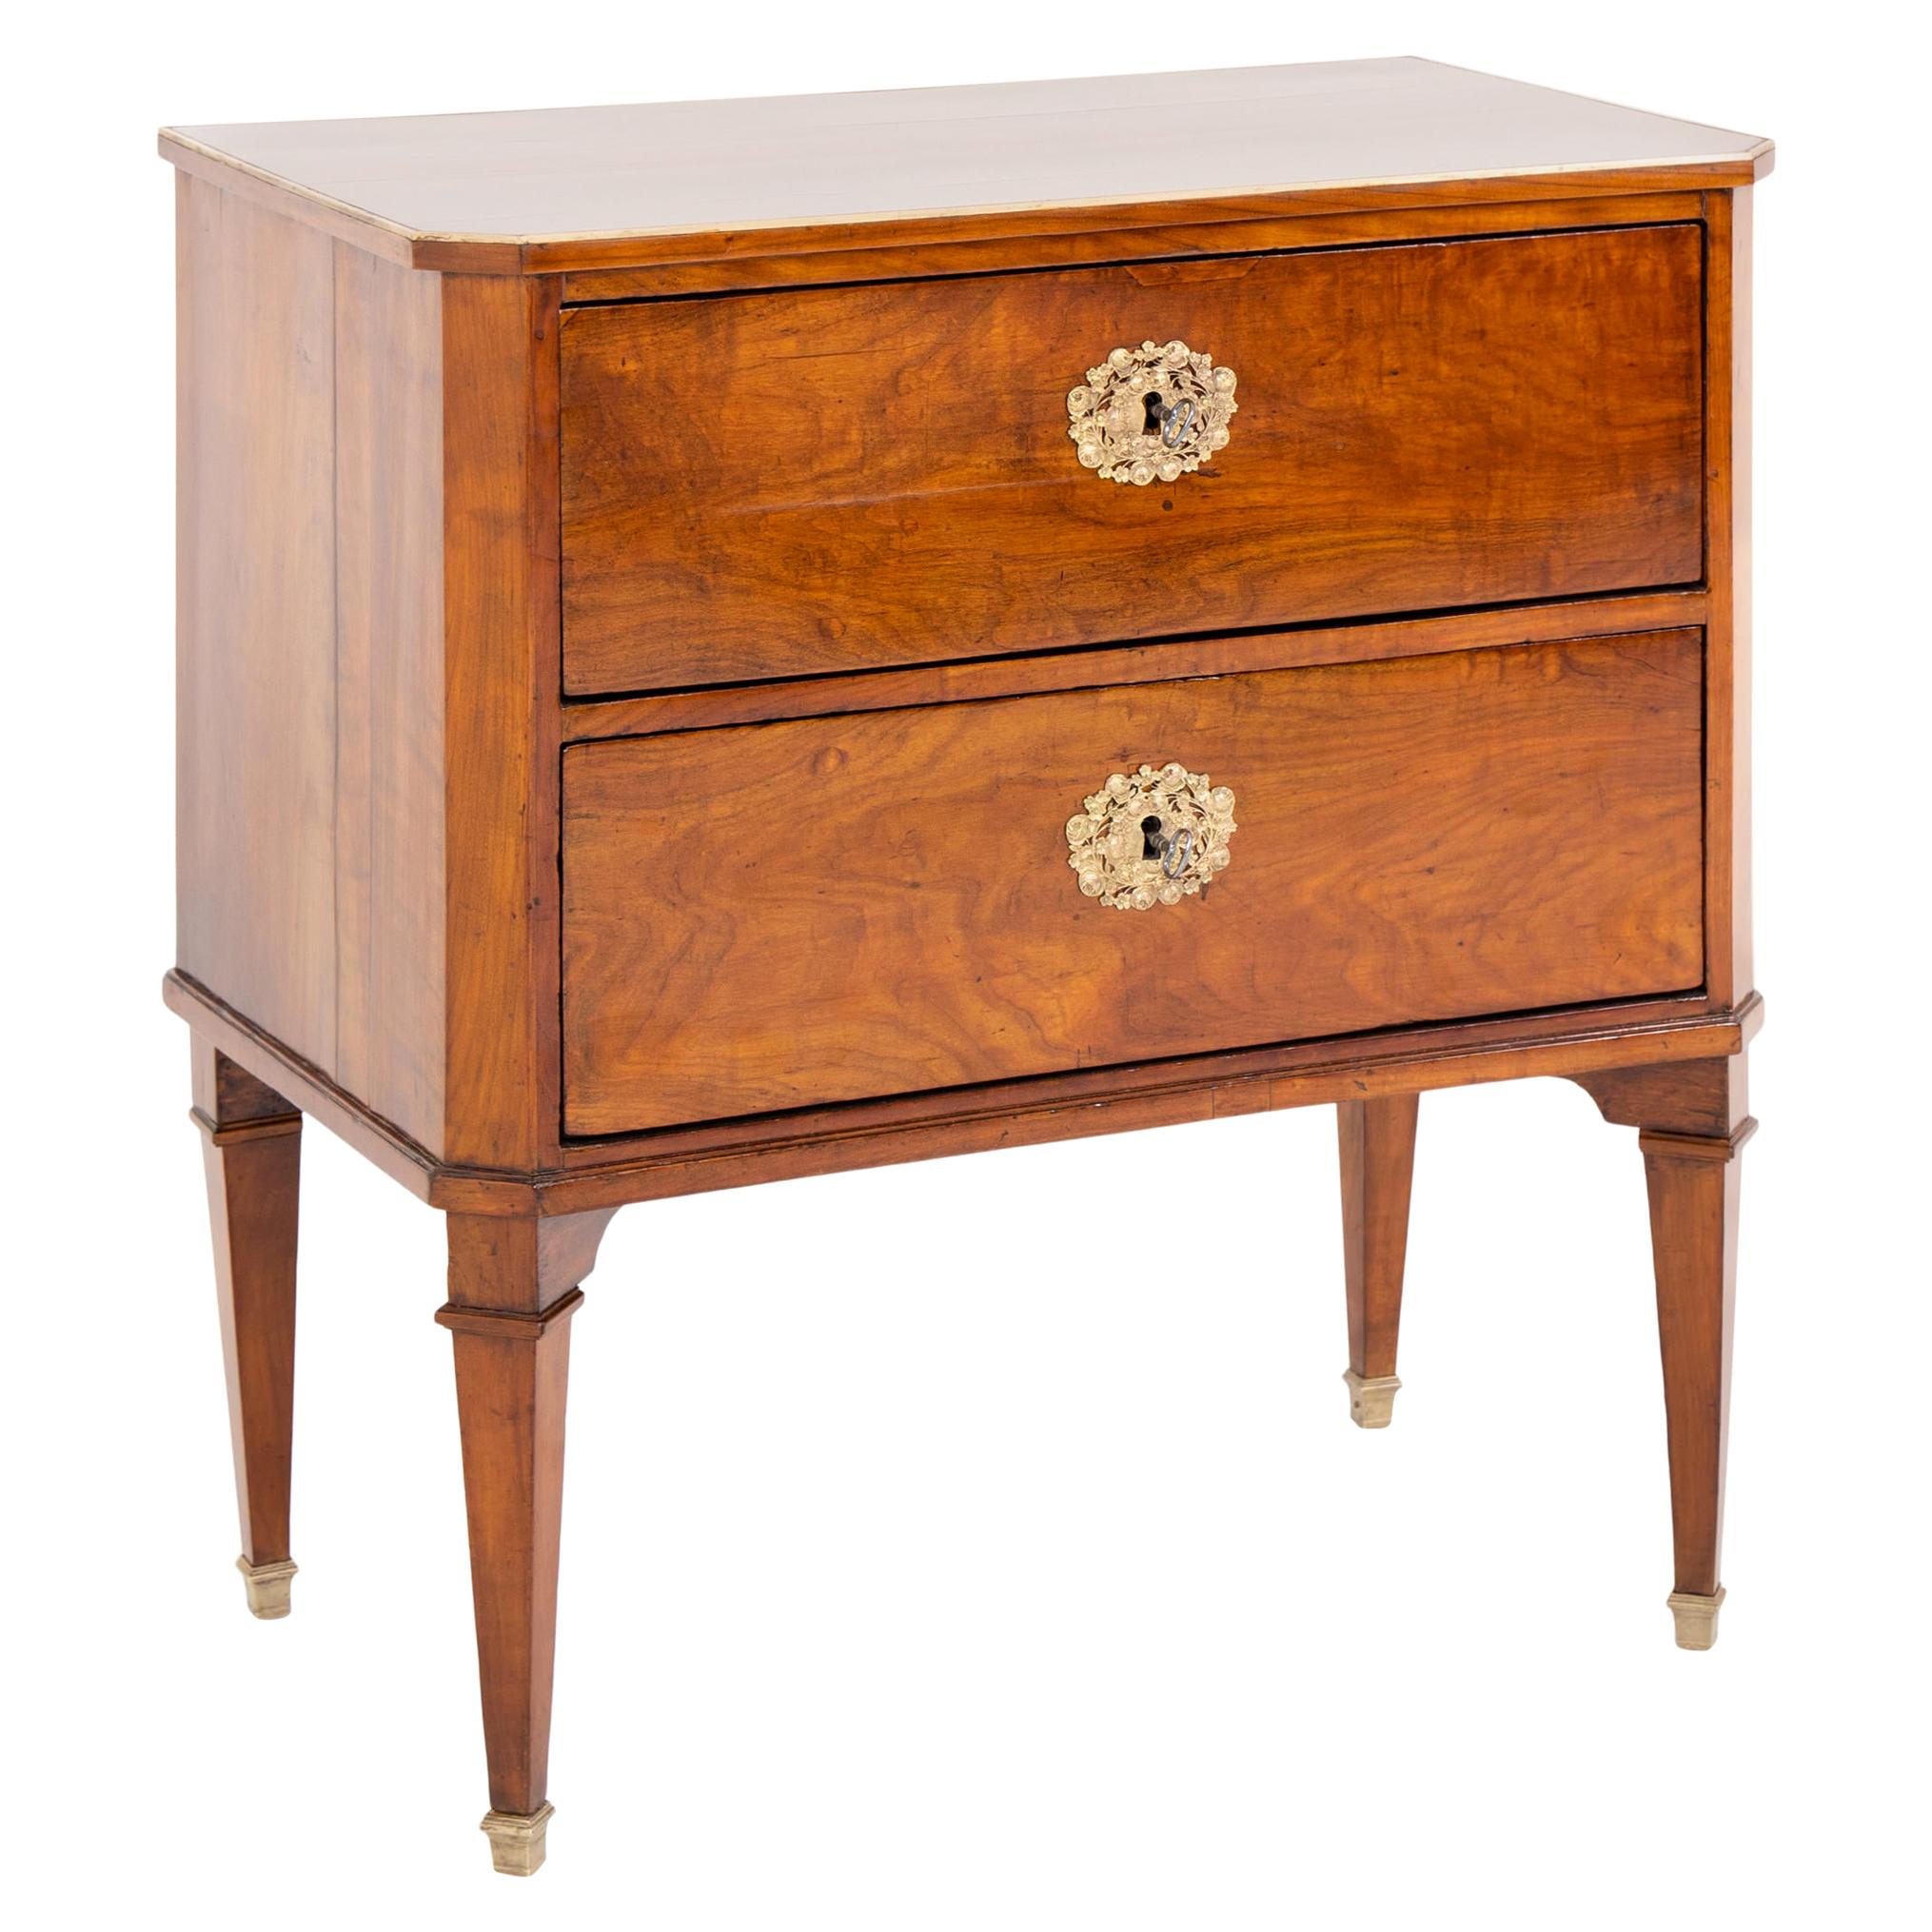 Neoclassical Chest of Drawers, circa 1800